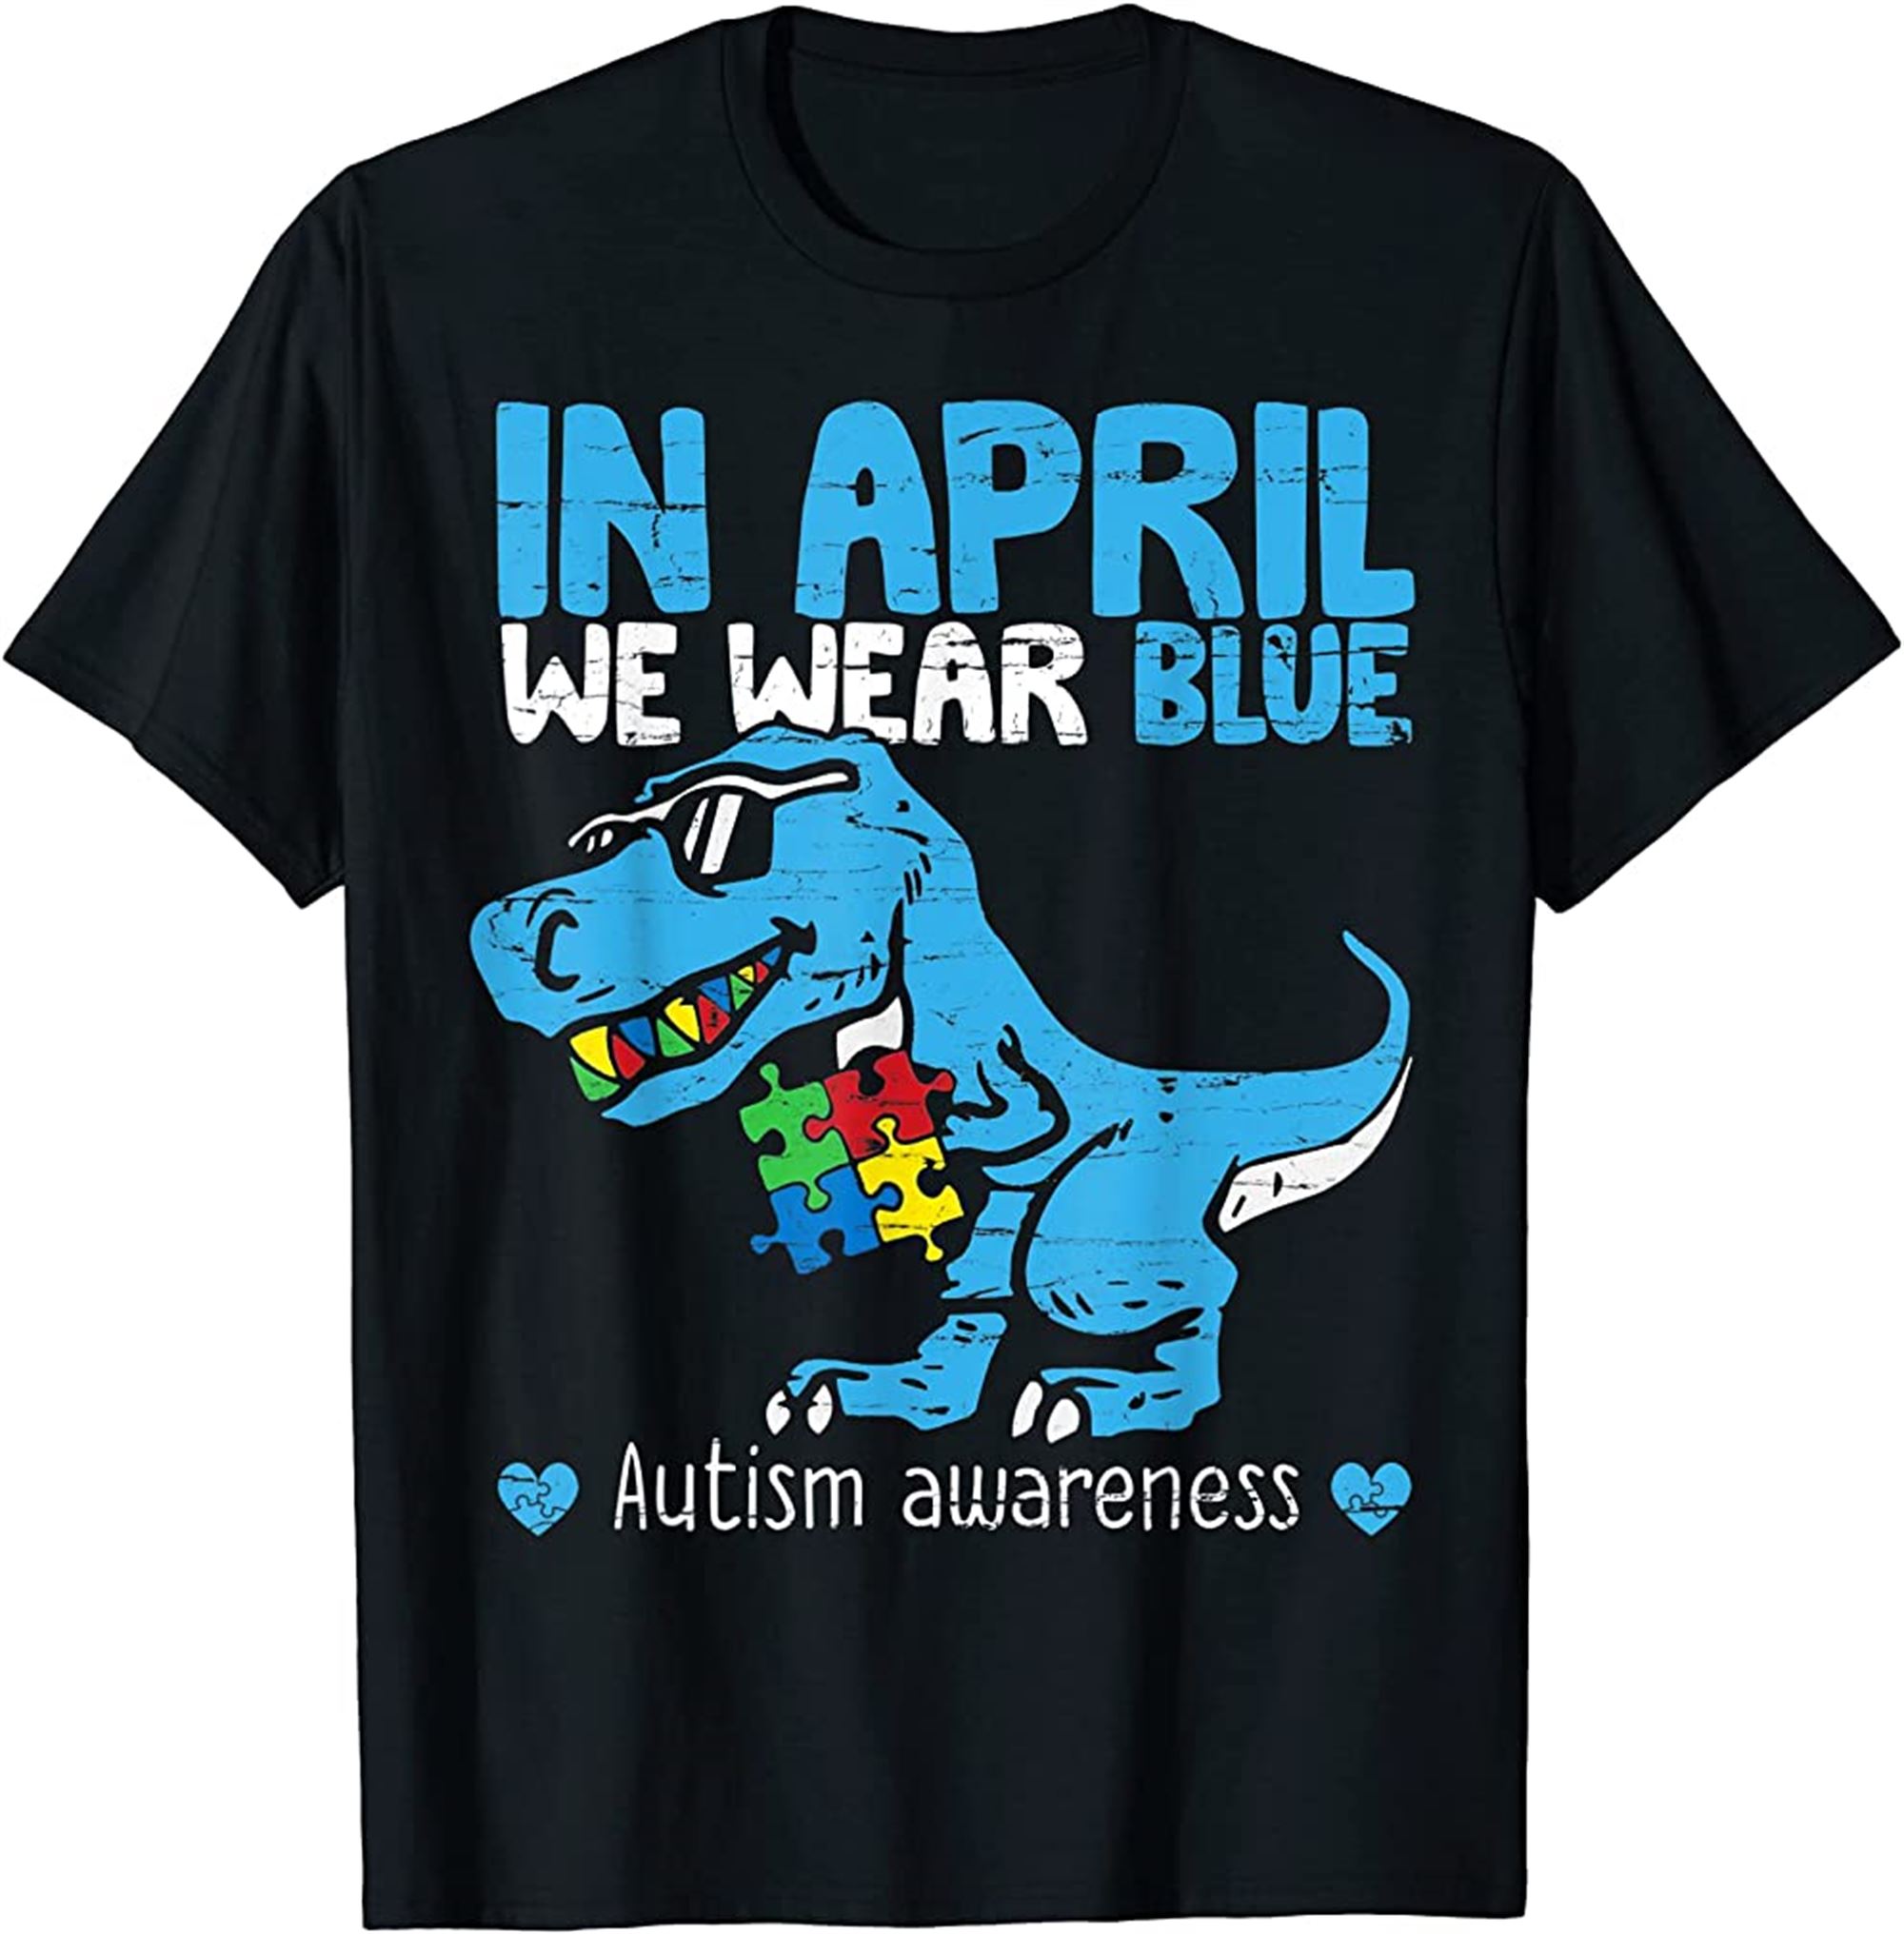 T Rex Dino In April We Wear Blue Autism Awareness Boys Kids T-shirt Size Up To 5xl